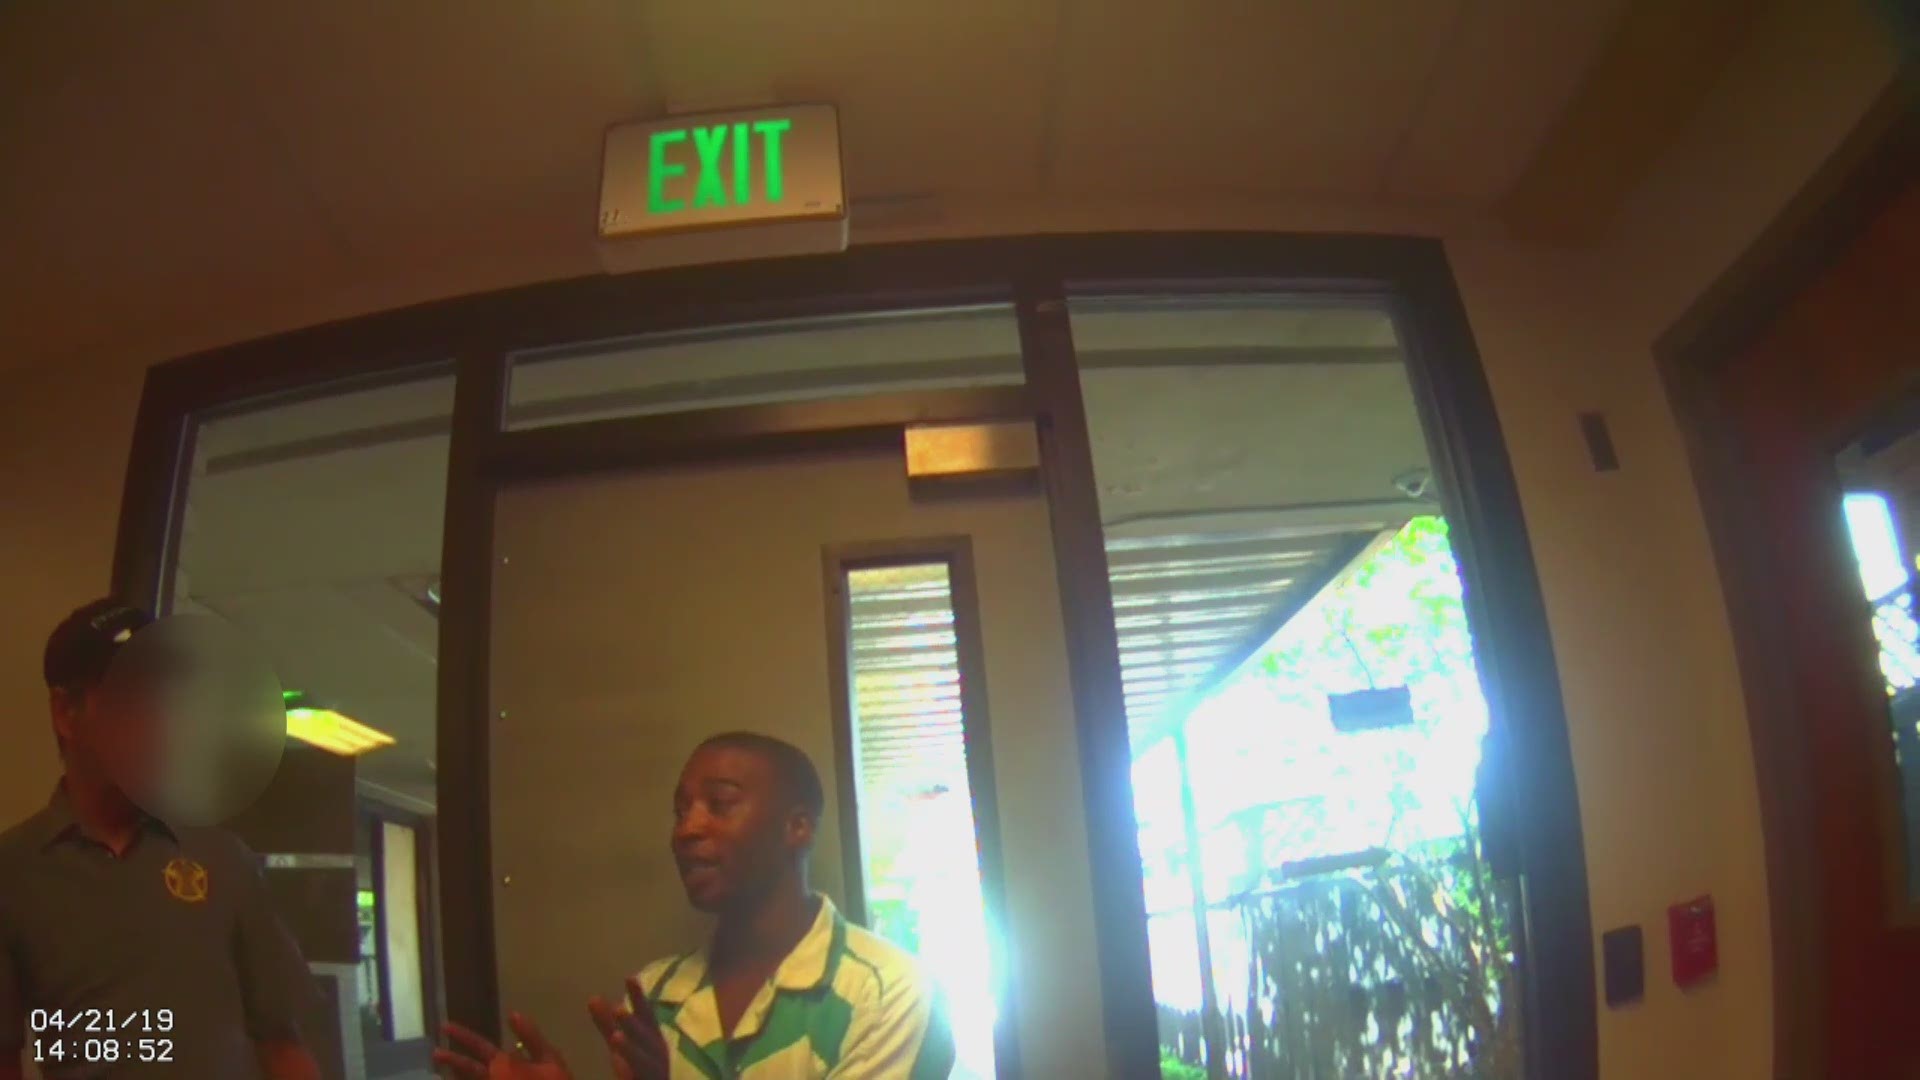 On Sunday, April 21, video shows a Burleson County Deputy taking Chester Jackson, Jr. to a mental health hospital in Austin. The video has been edited for time and masks the faces of some individuals to protect their privacy.